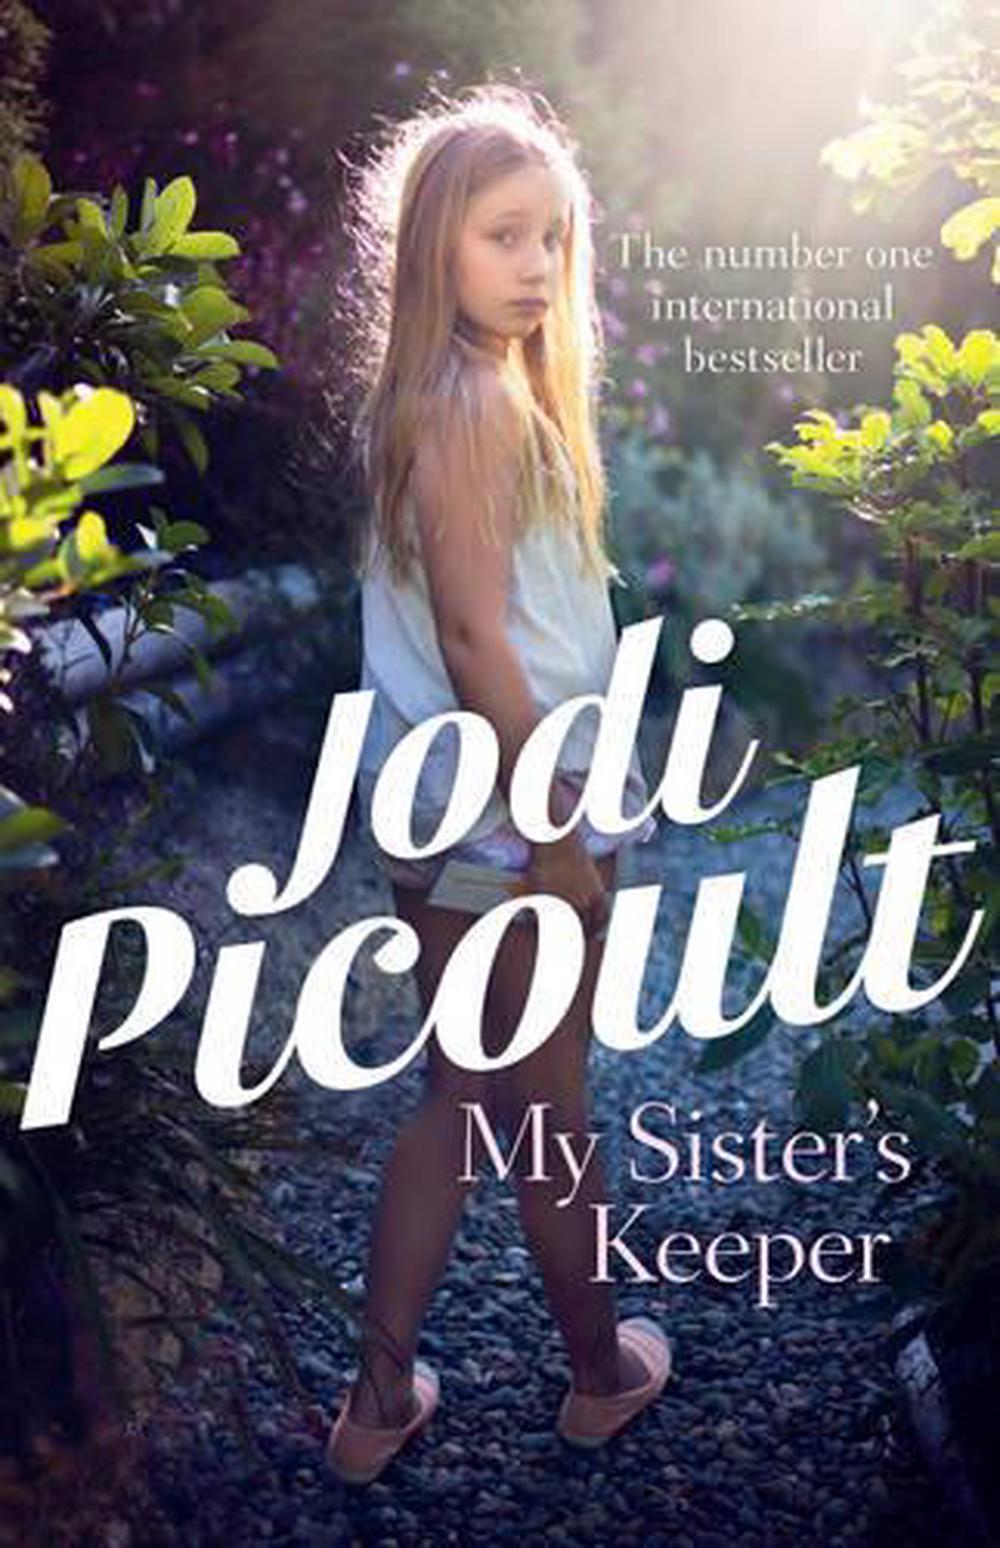 My Sisters Keeper By Jodi Picoult Paperback 9781743318959 Buy Online At The Nile